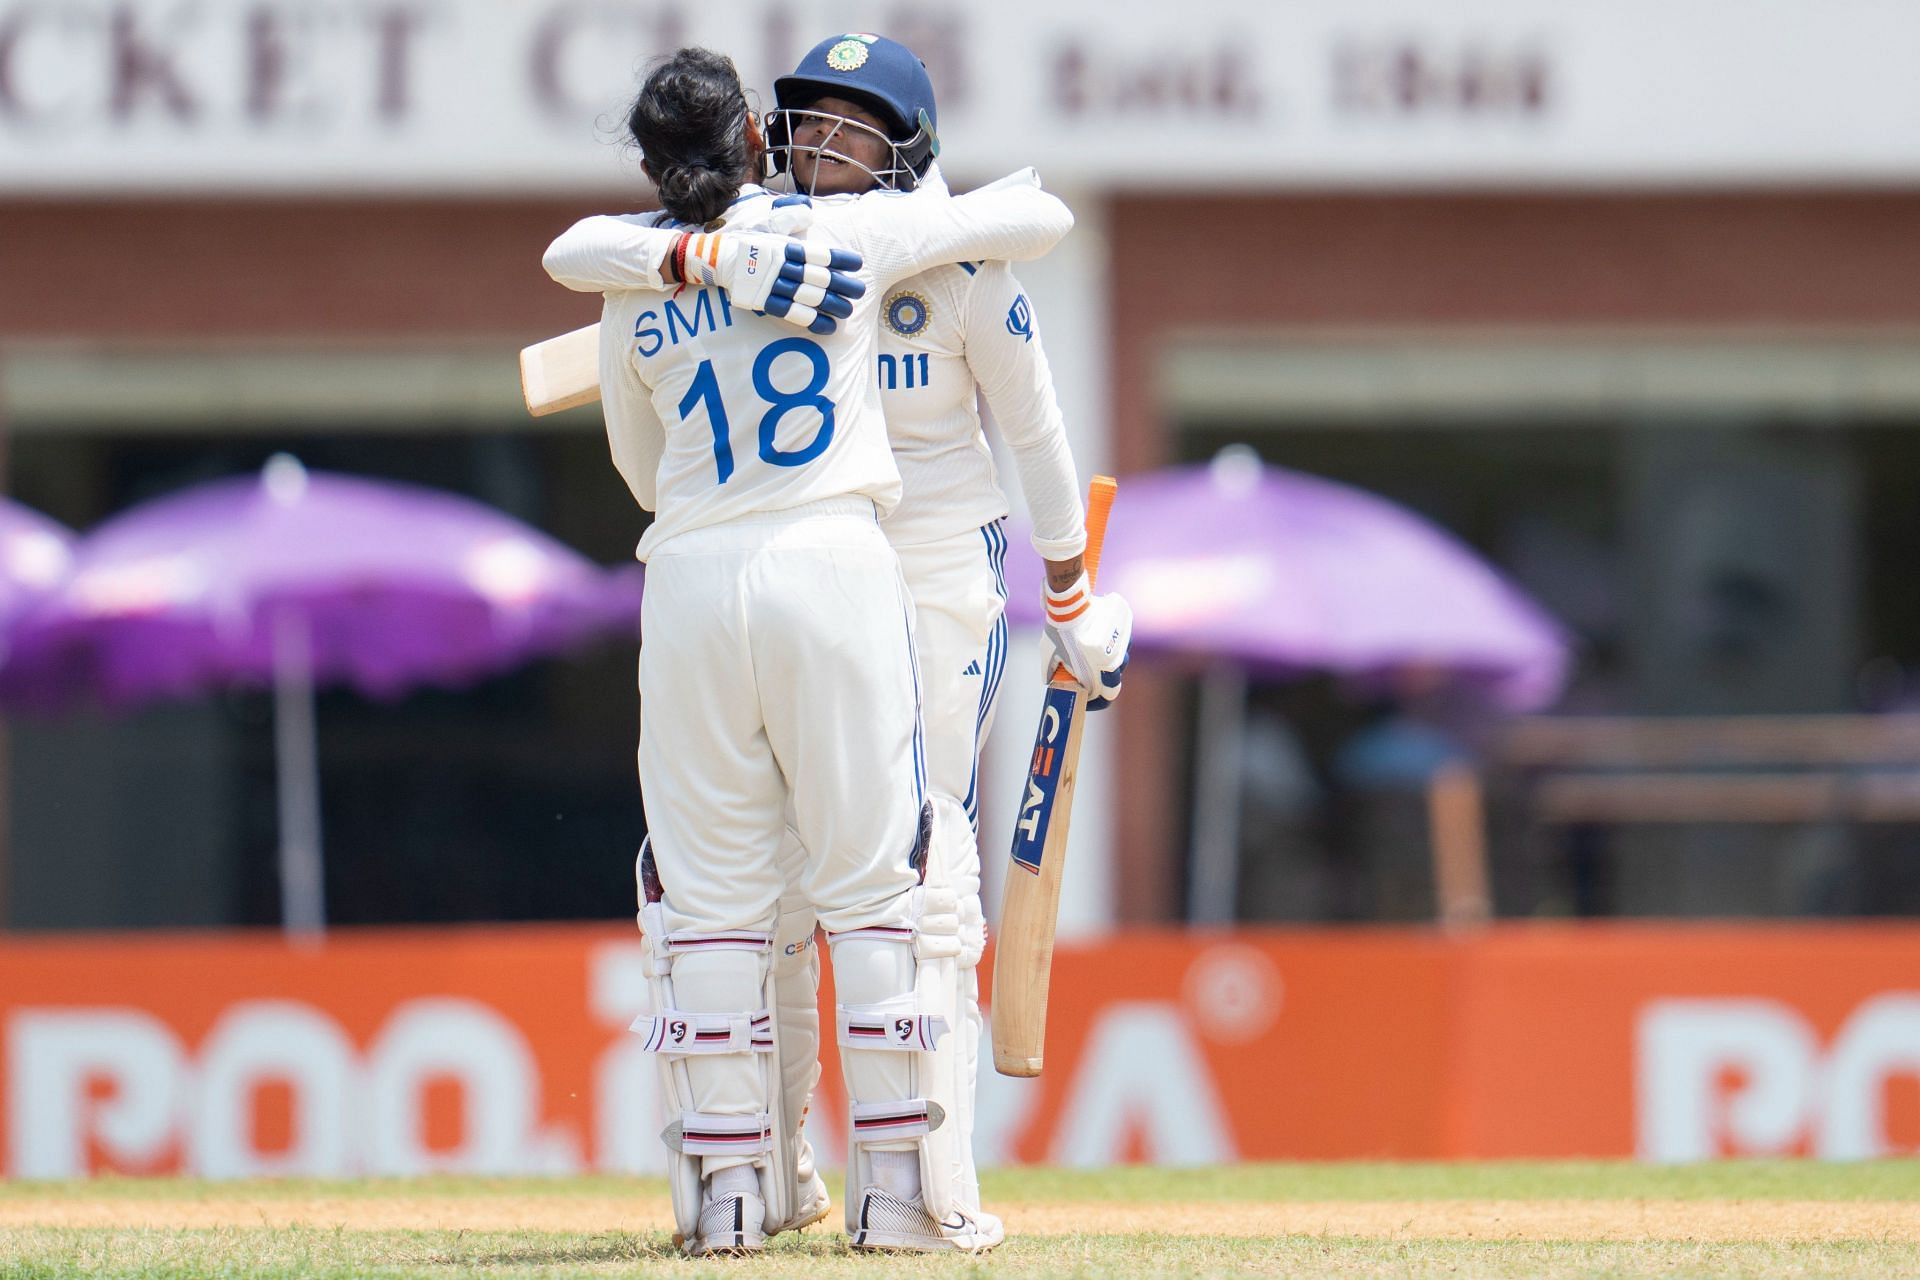 [Watch] Shafali Verma and Smriti Mandhana score centuries on consecutive deliveries during IND vs SA one-off Test